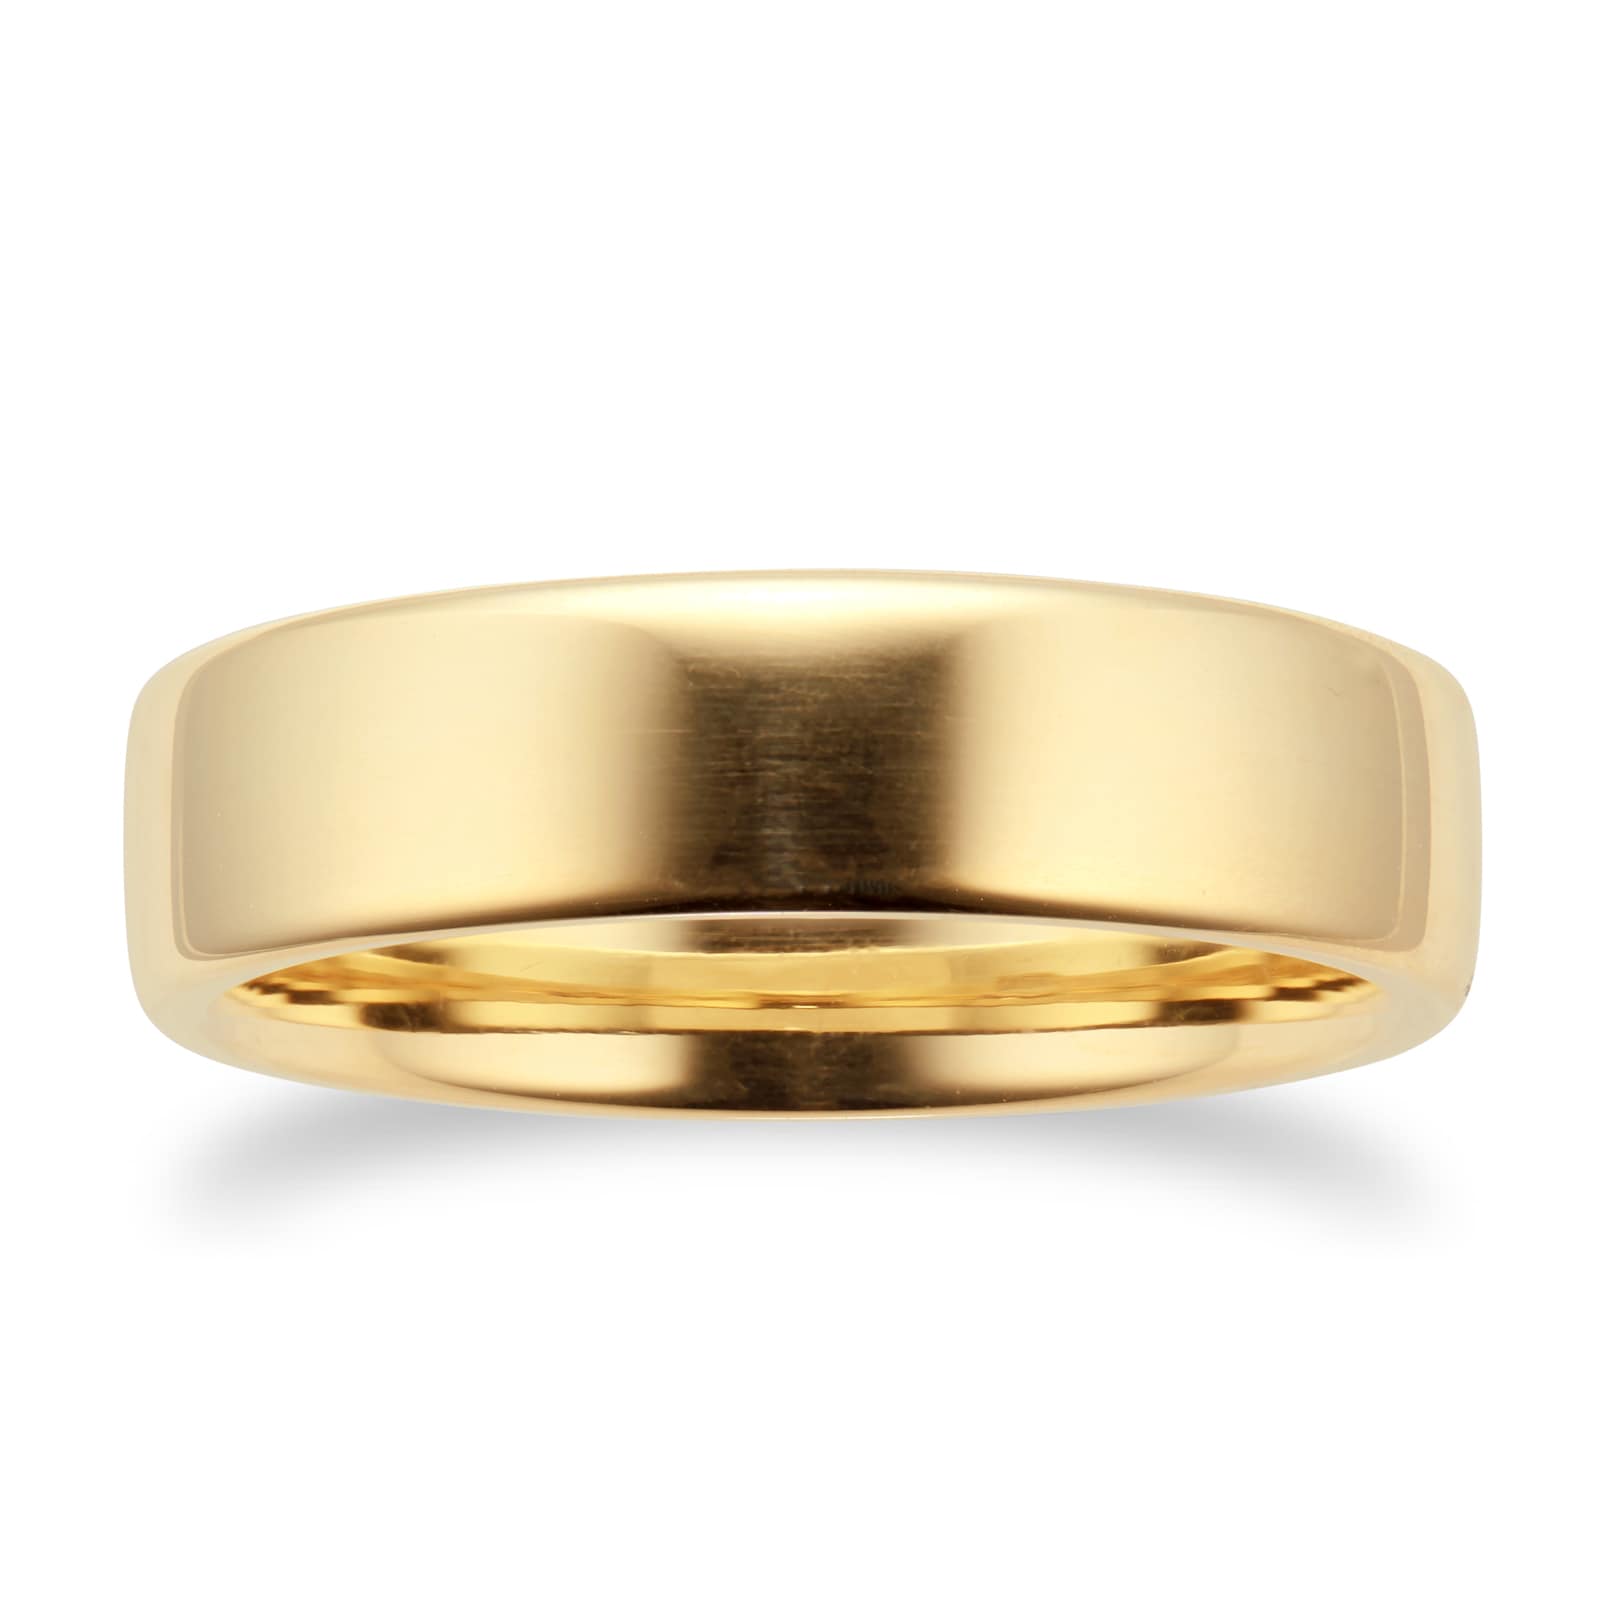 5mm Slight Court Heavy Wedding Ring In 18 Carat Yellow Gold - Ring Size M